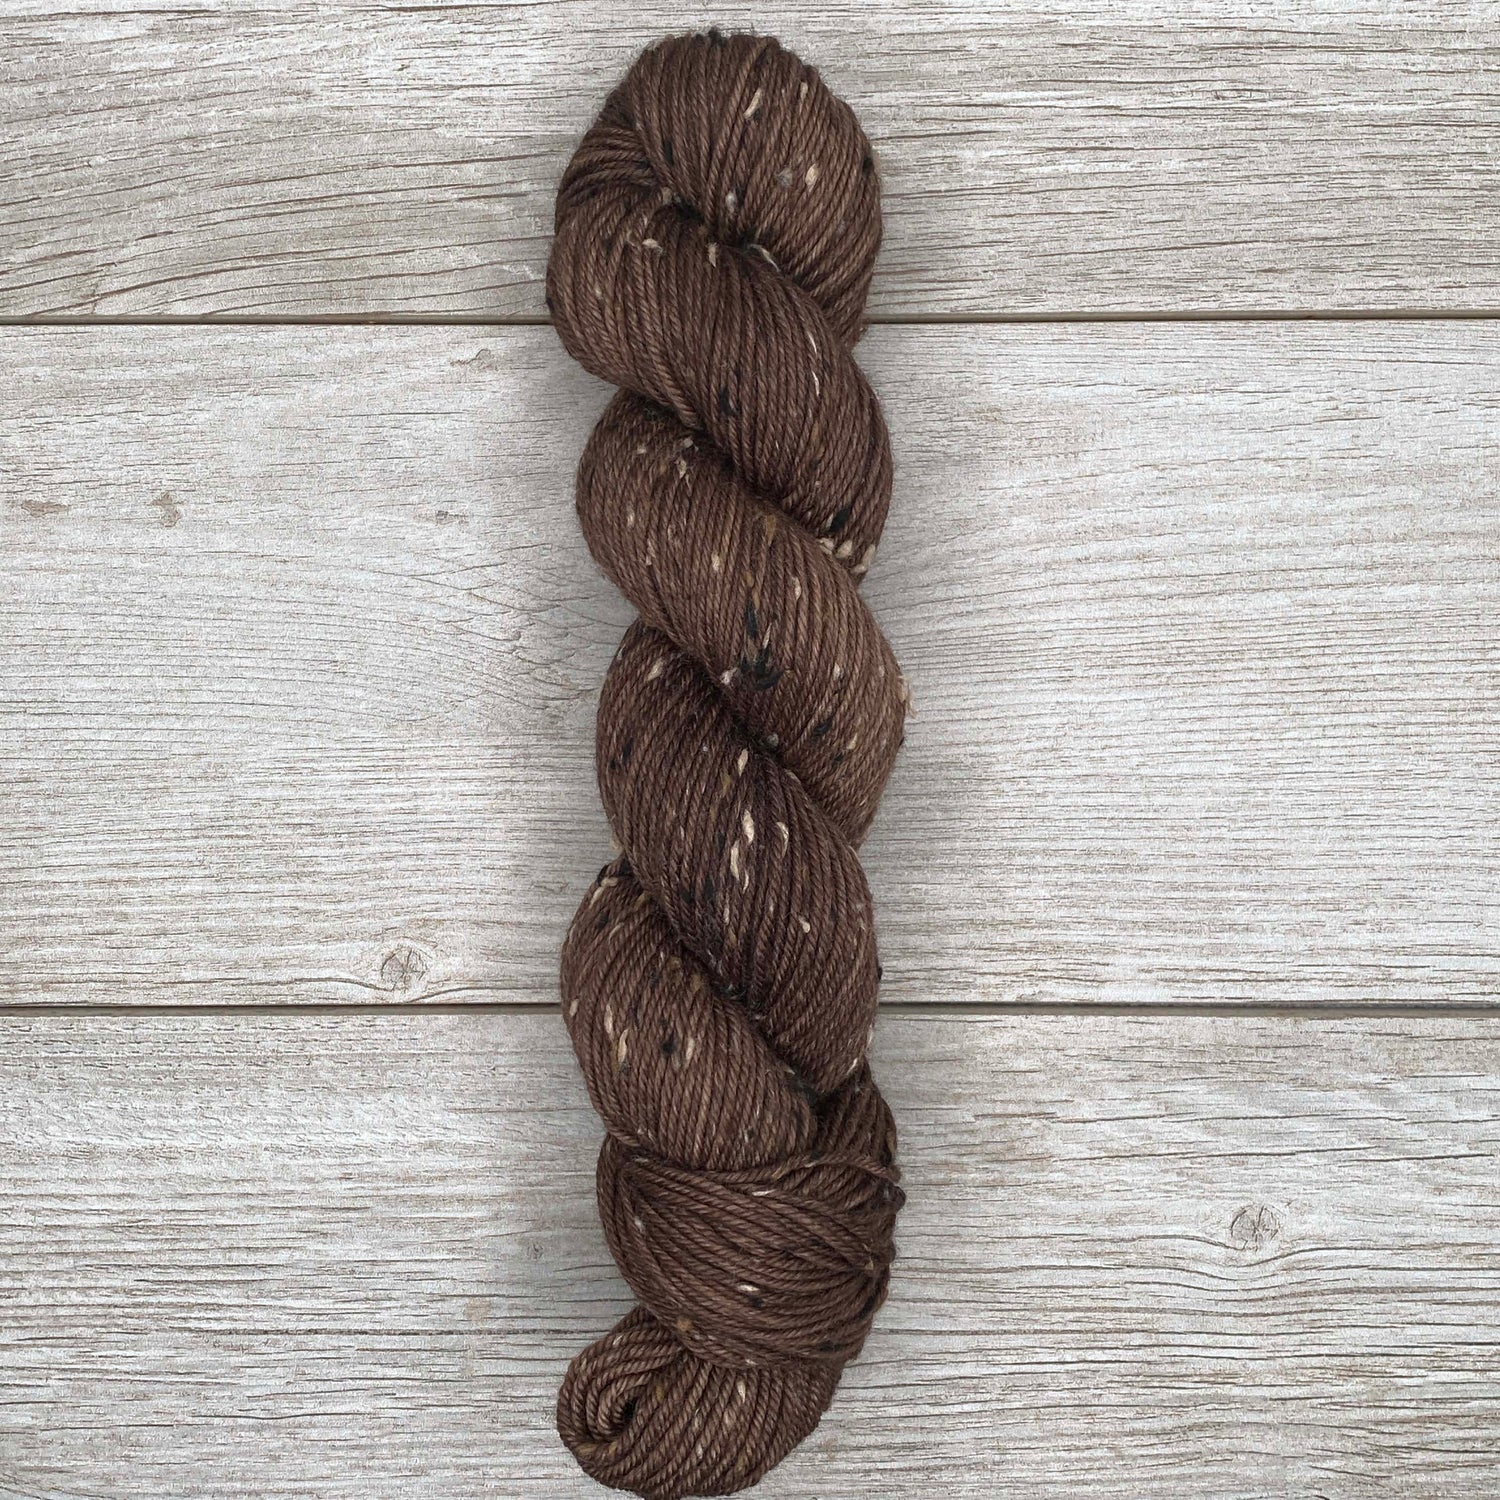 Twig  |  Donegal DK  |  DK weight